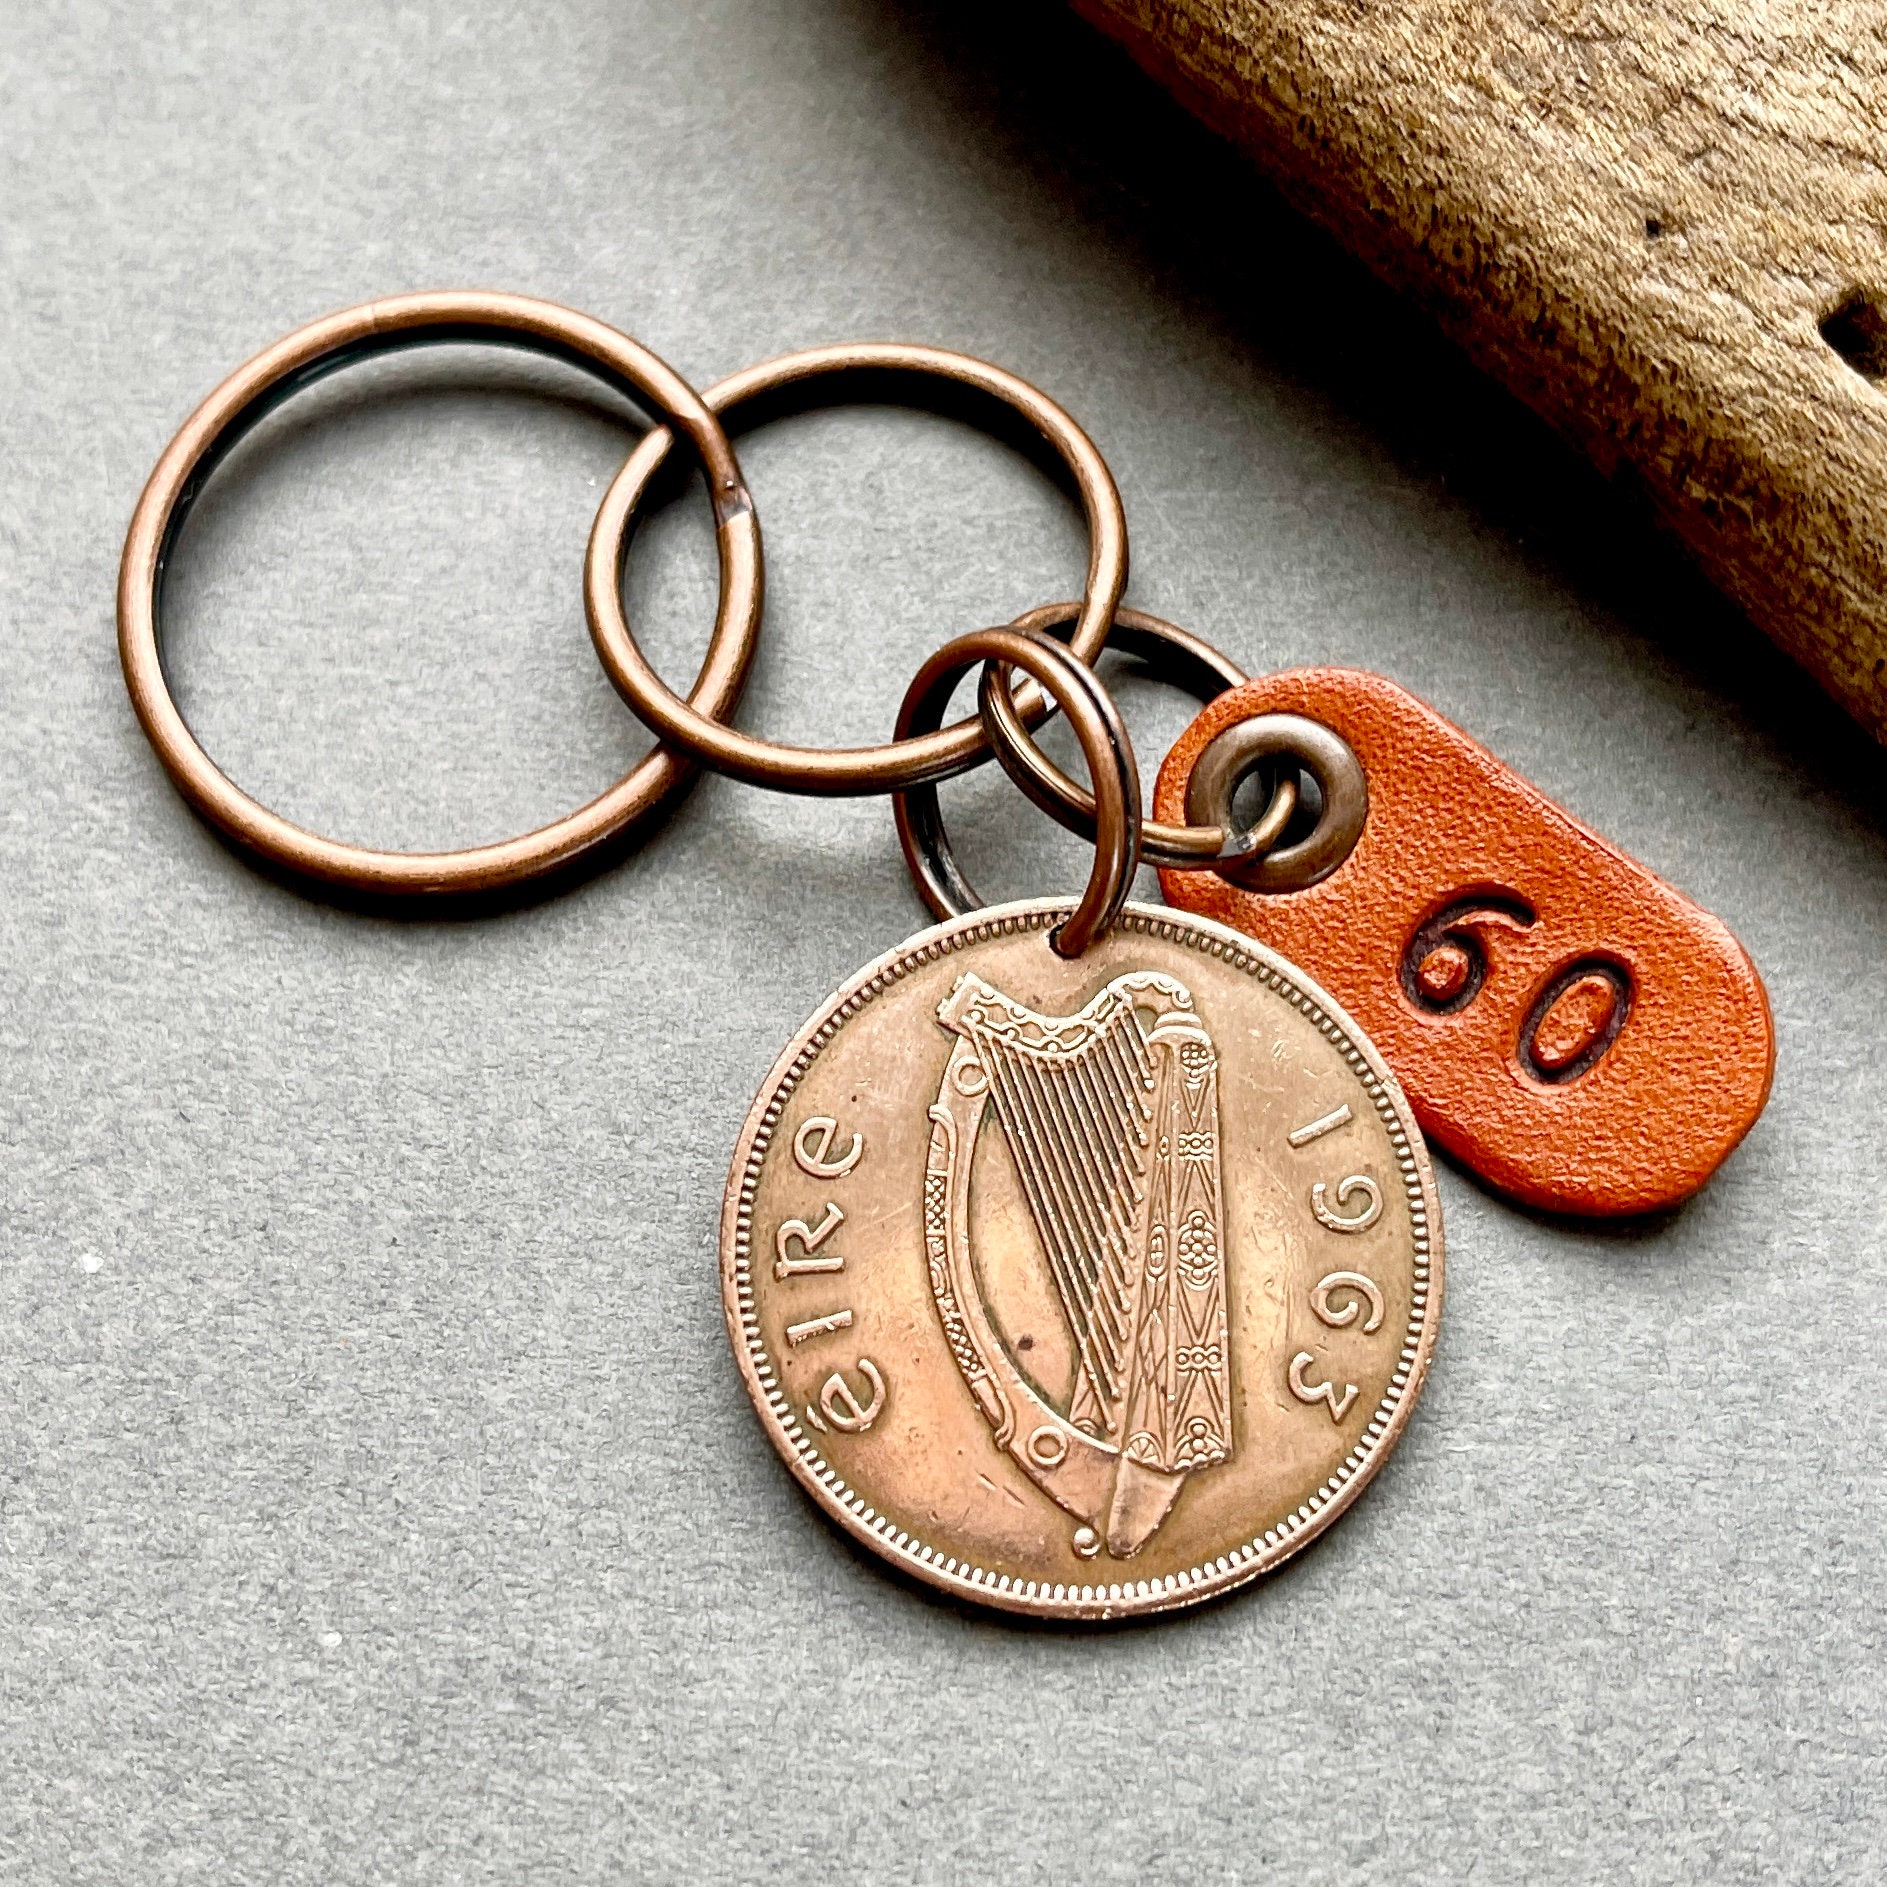 QuirkyGirlWorkshop 60th Birthday Gift, 1964 Irish Shilling Key Chain, Keyring or Clip, A Perfect 60th Anniversary Gift, for Some Who's Heart Is in Ireland